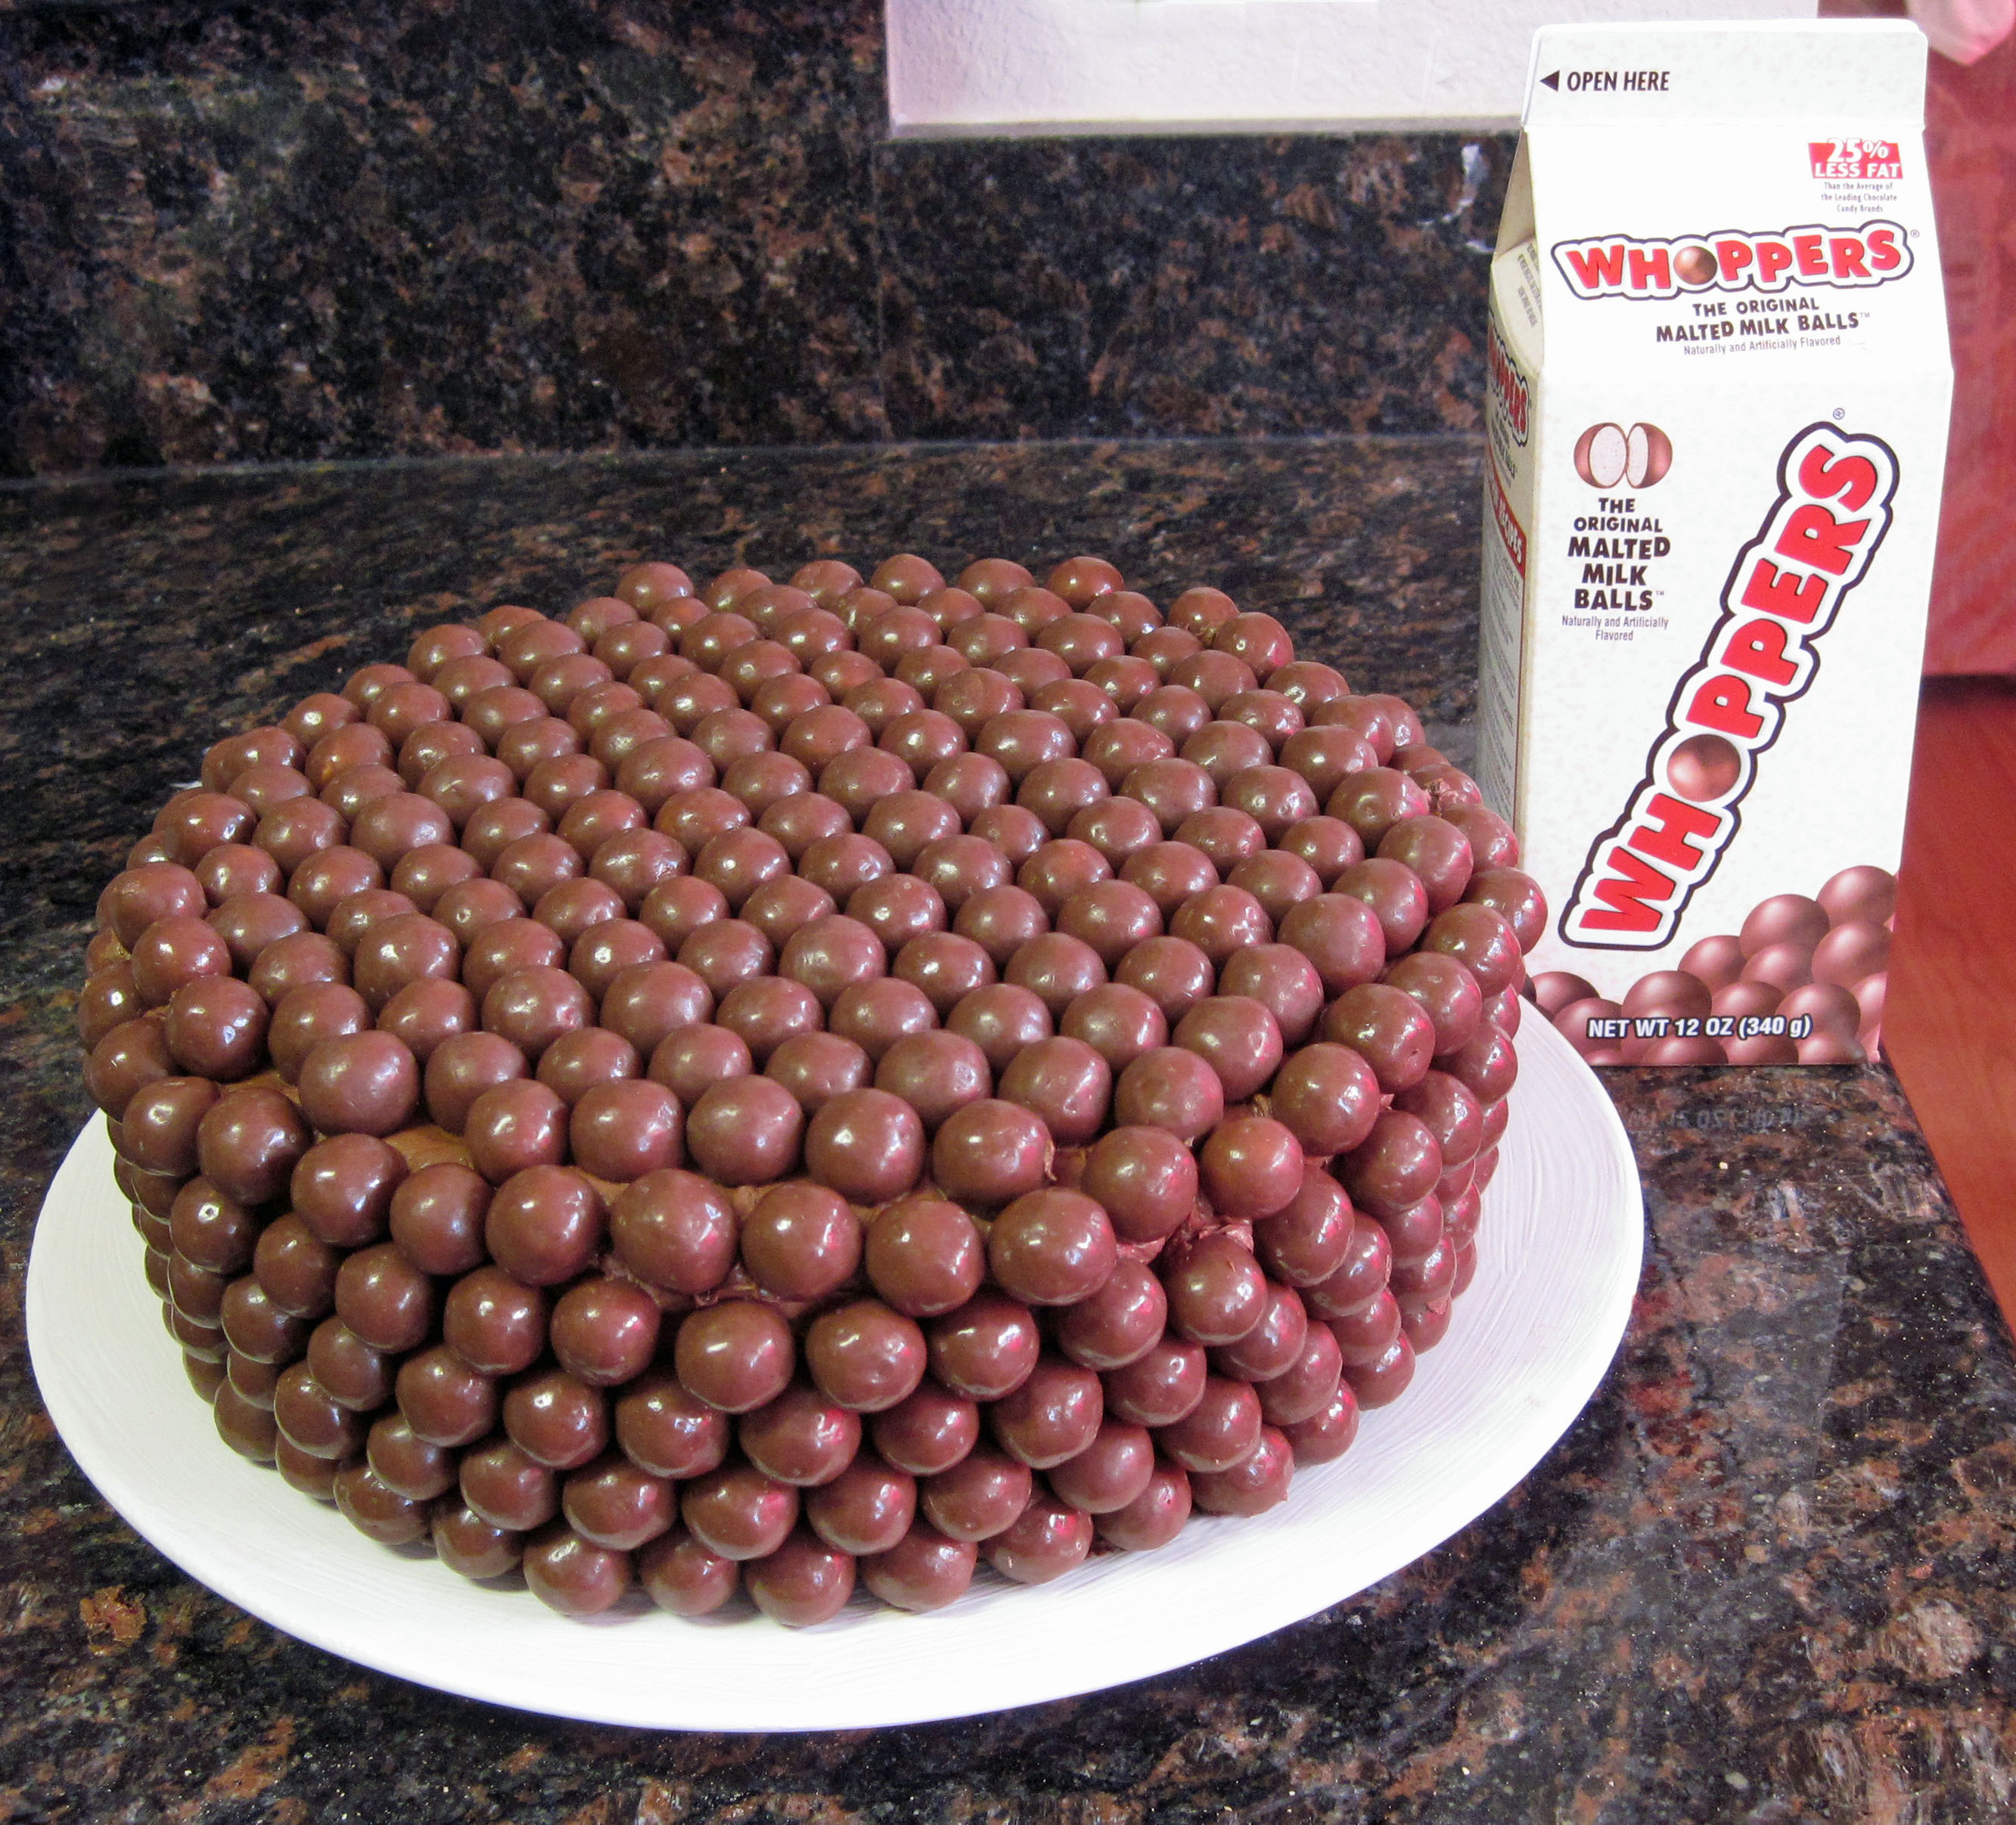 Whopper Candy Cake